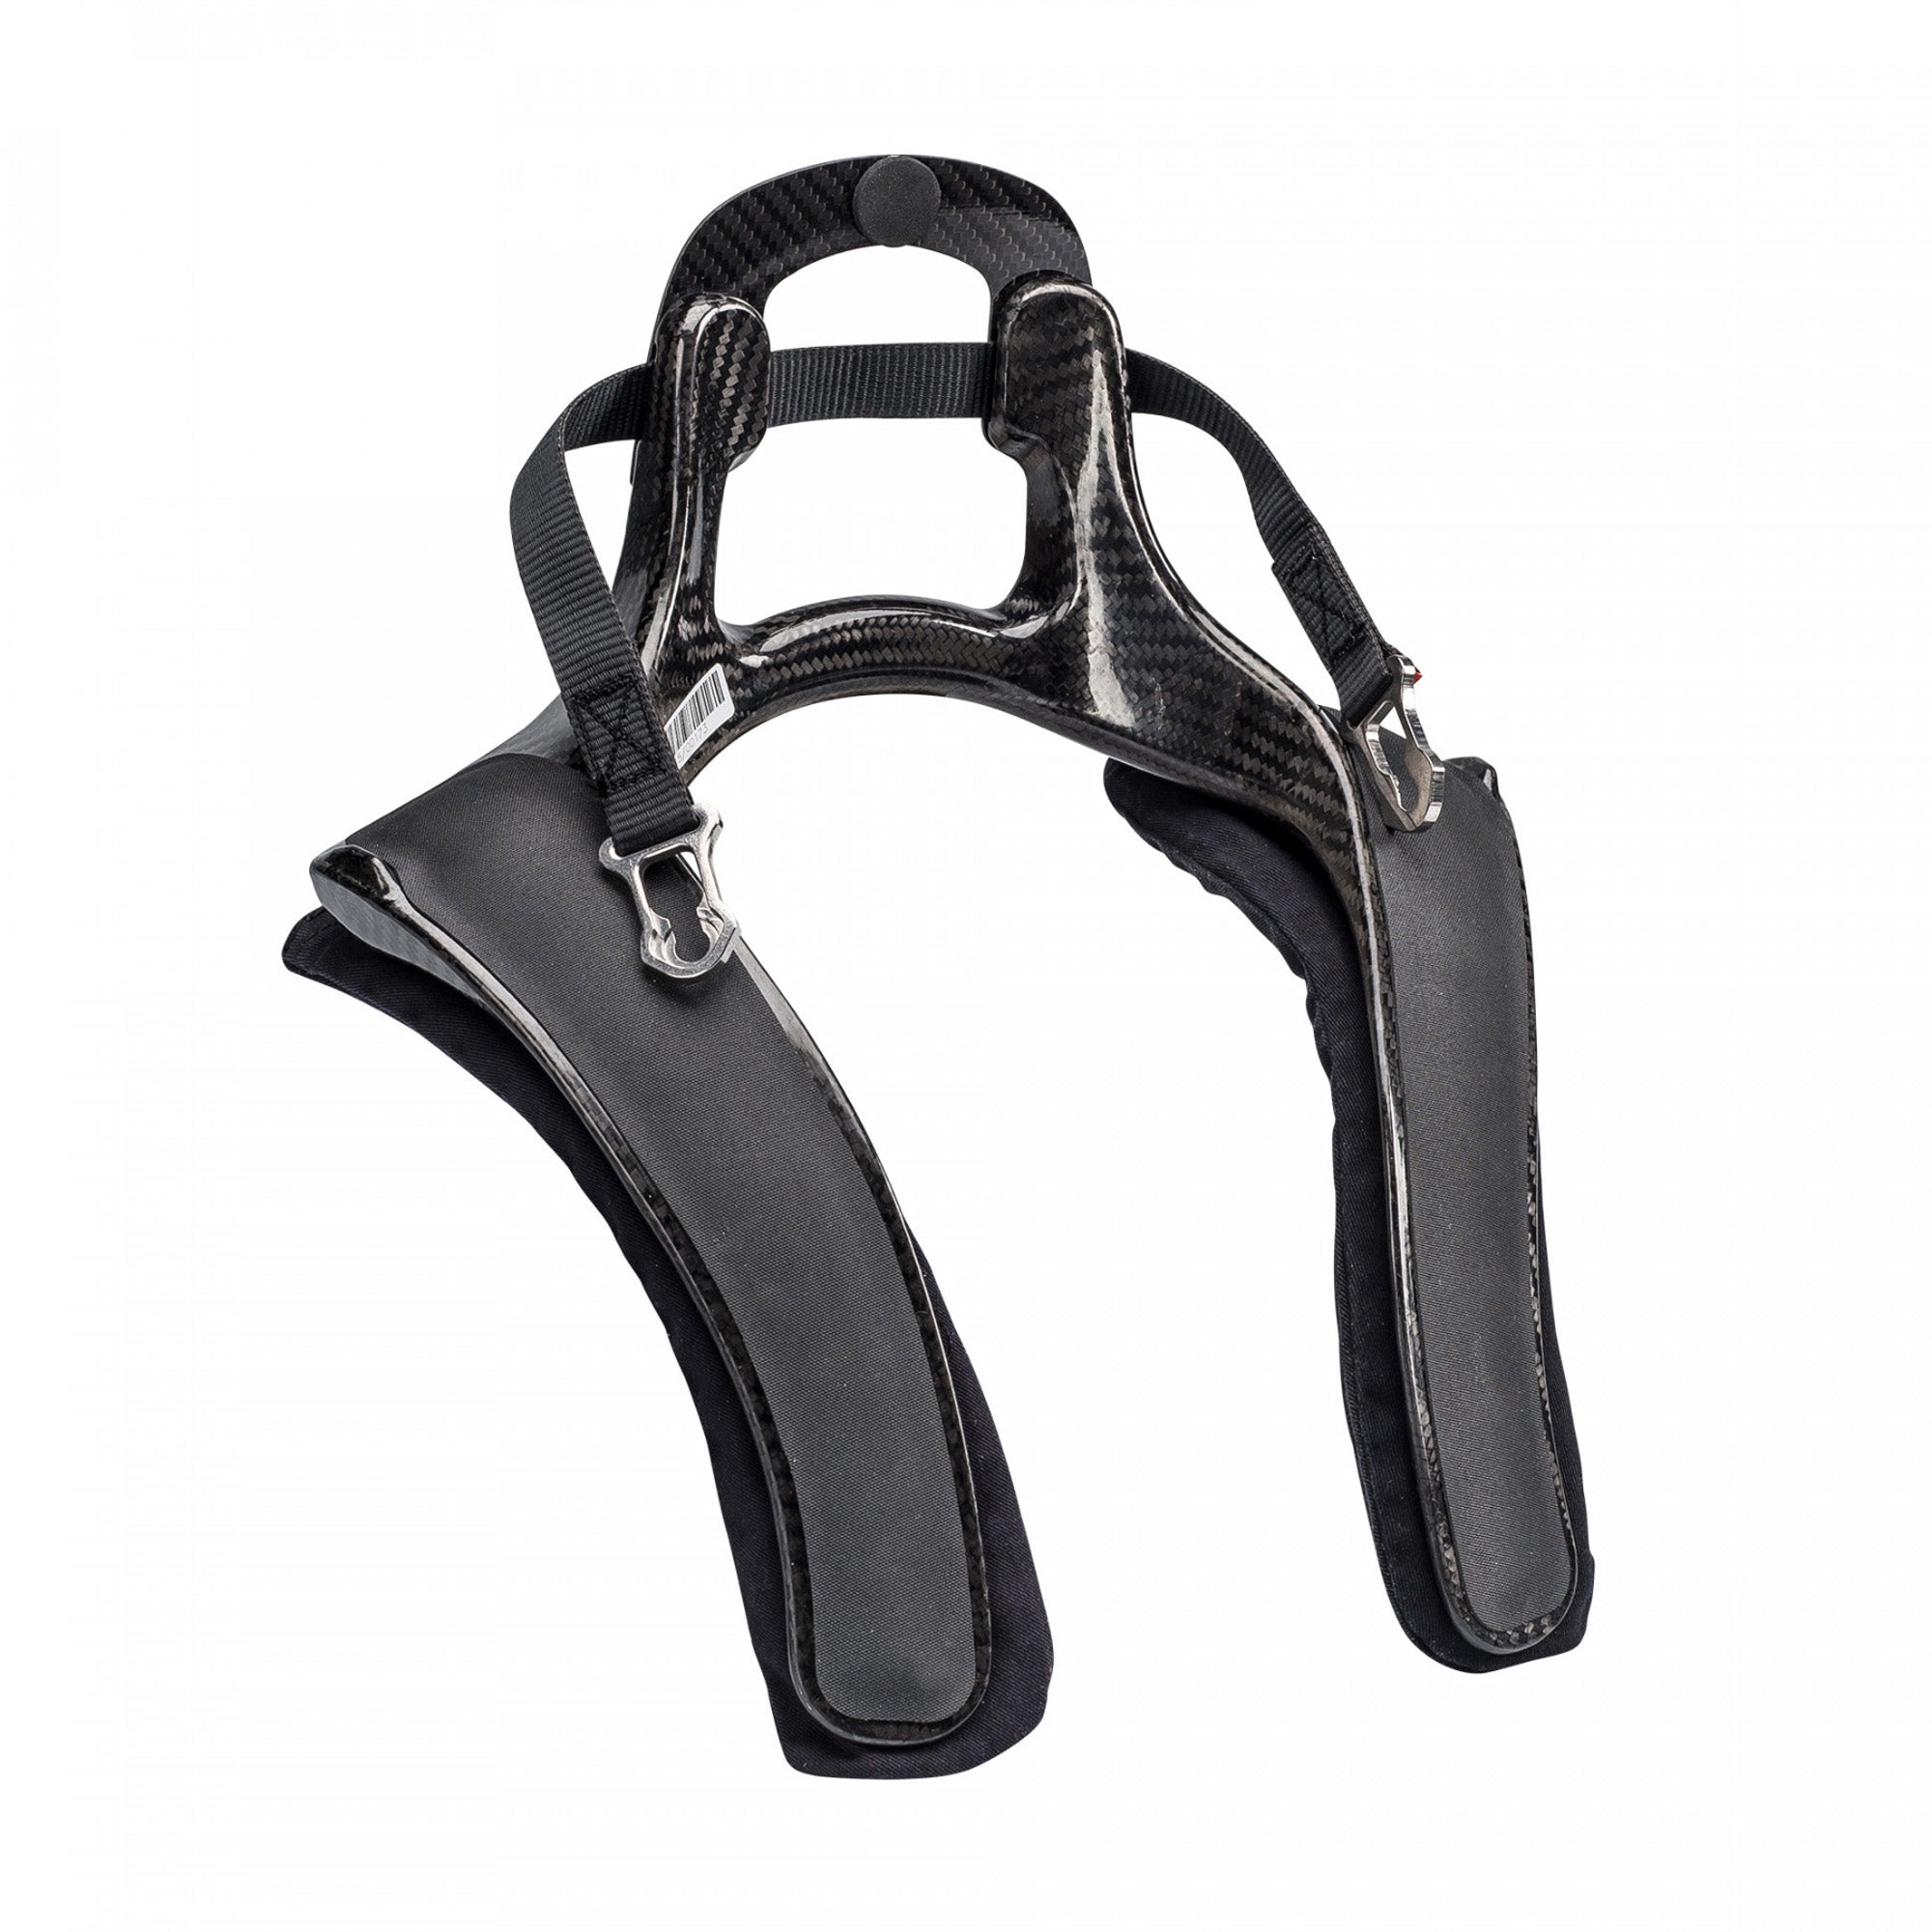 Stand 21 Ultimate 20 Head and Neck Restraint